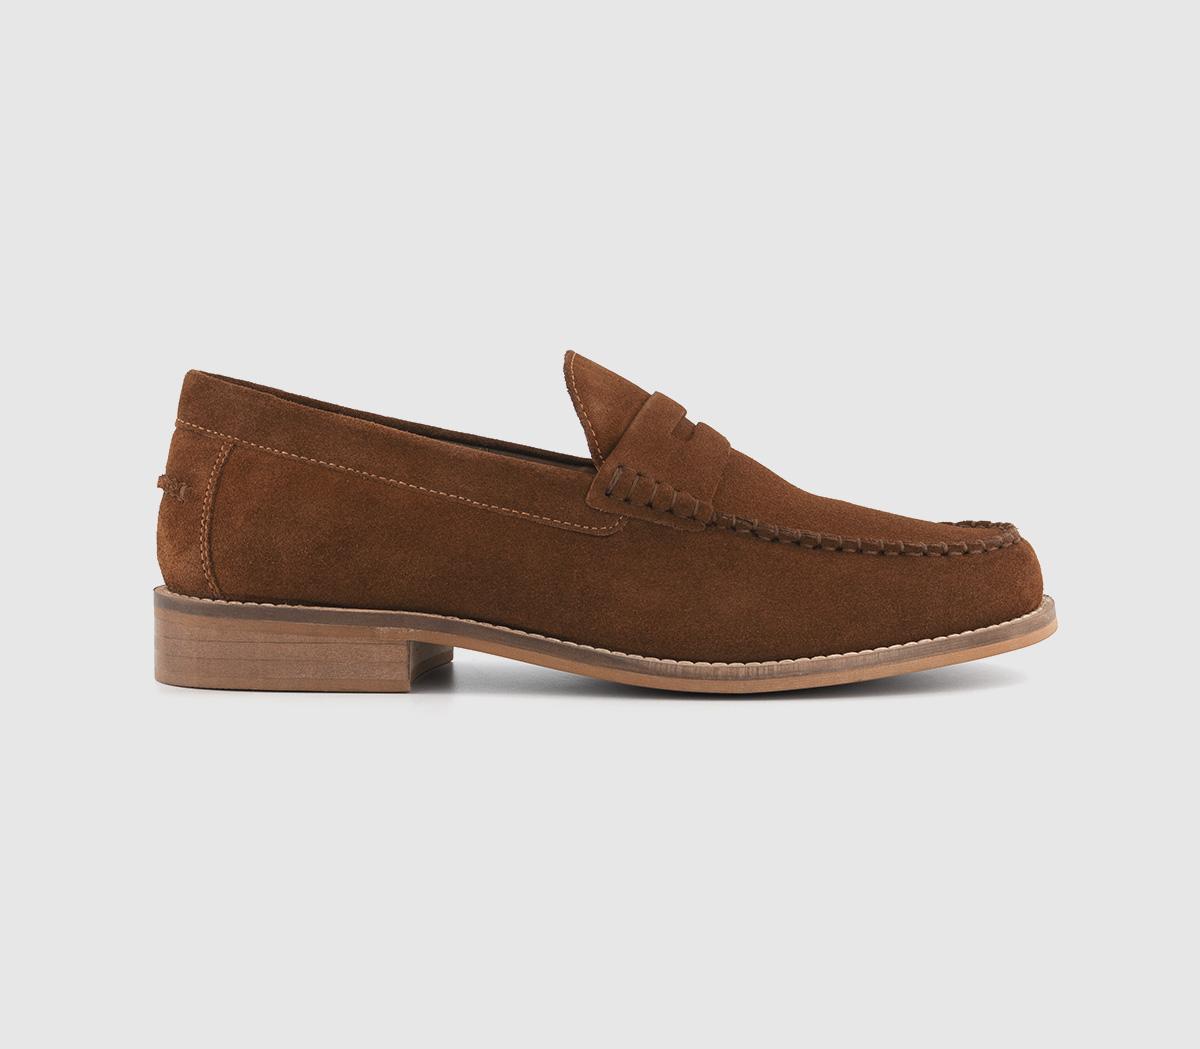 OFFICECanyon Apron Stitch LoafersRust Suede